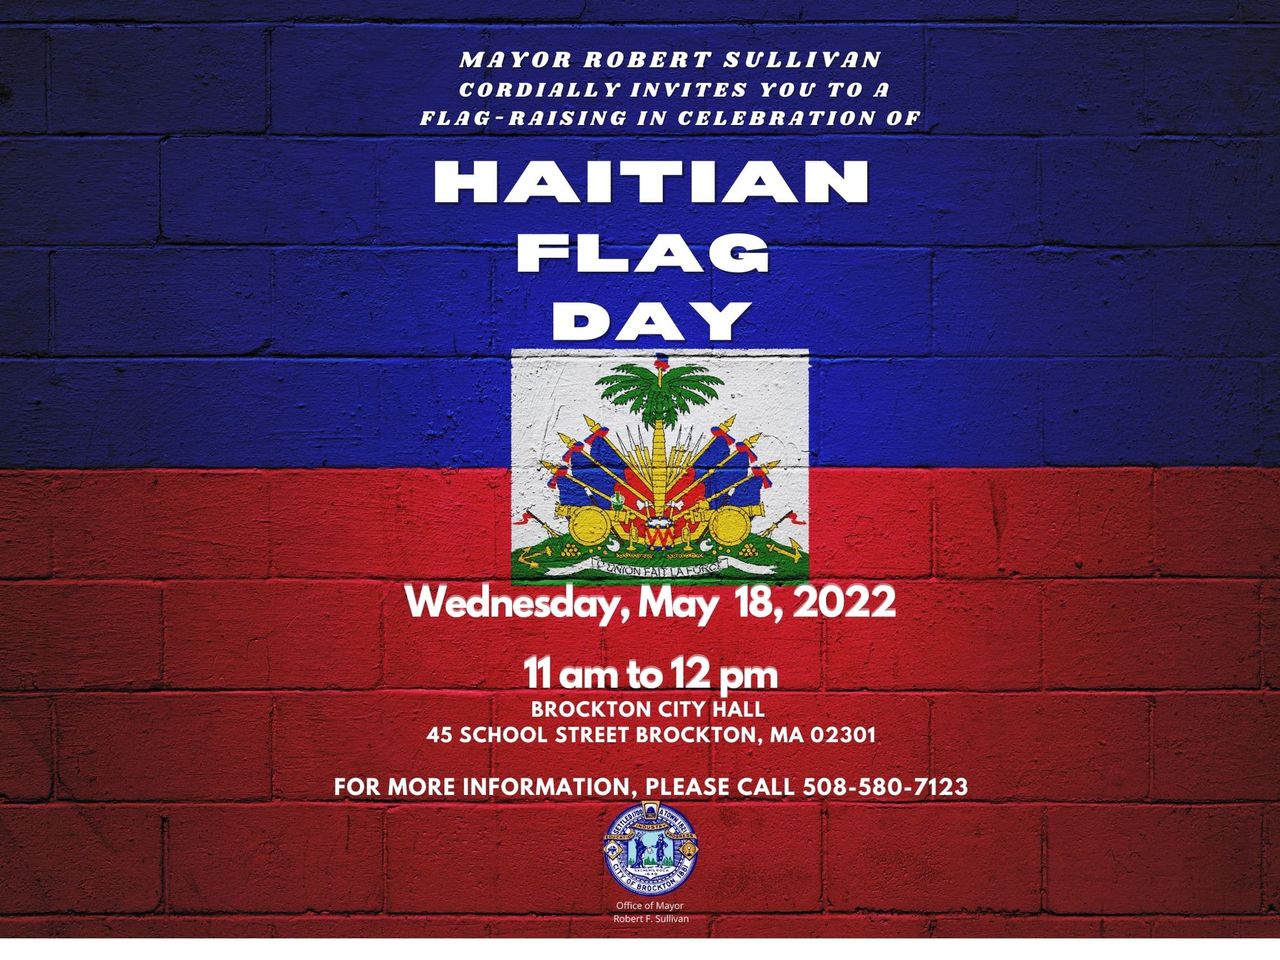 Haitian Flag Day, May 18, 2022 from 11:00 AM until 12:00 PM